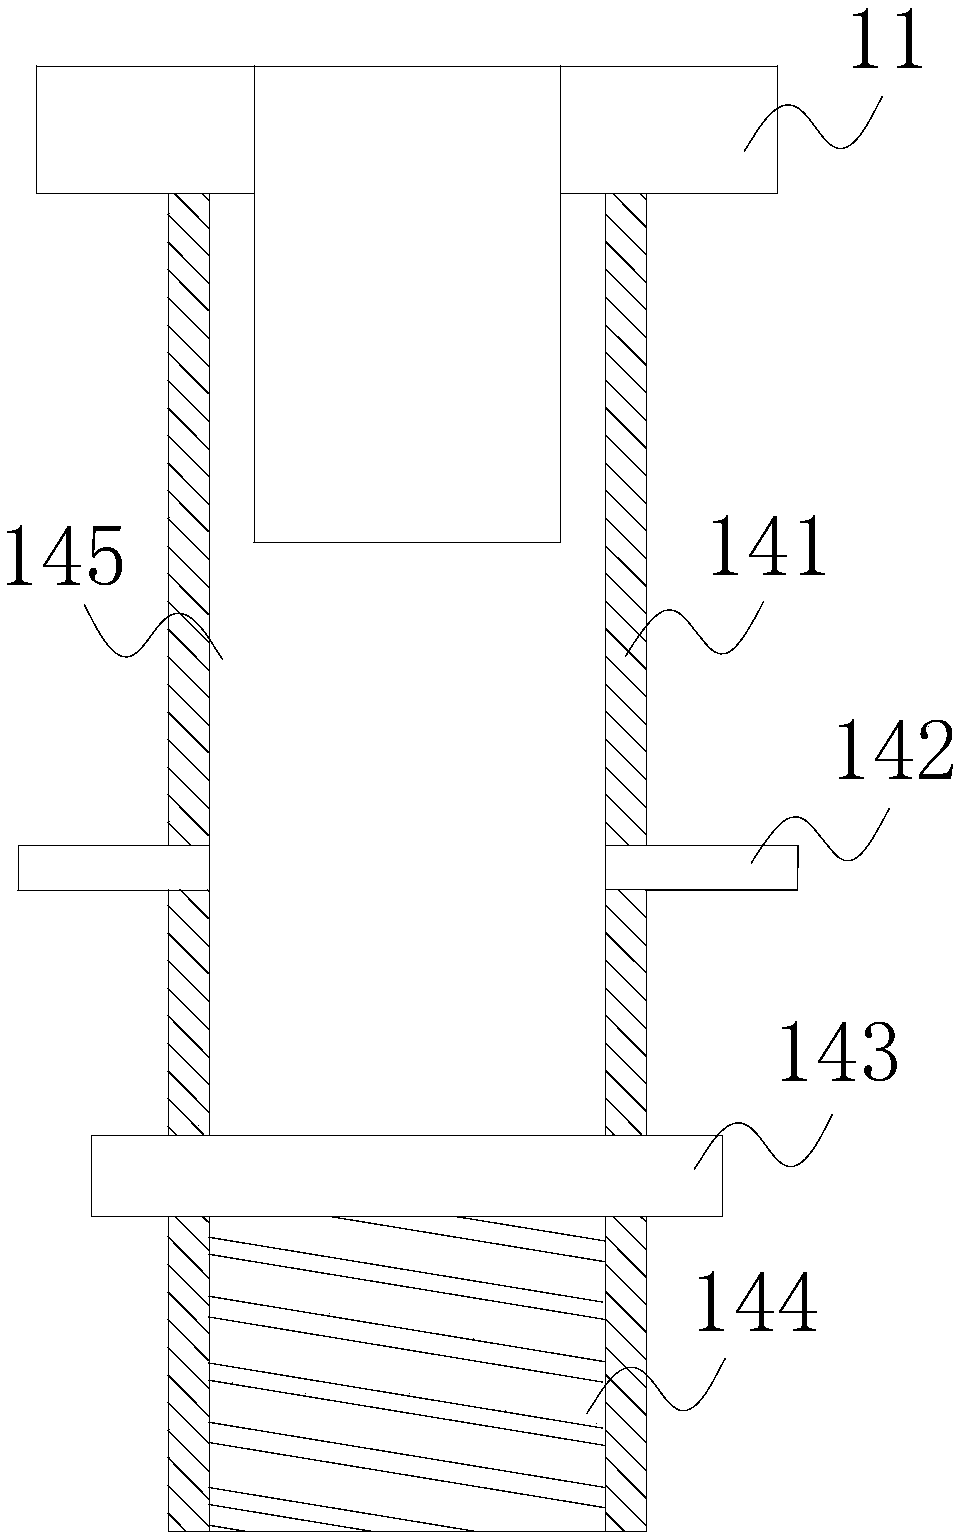 Pay-off device preventing cable from being completely withdrawn and used for electric power construction